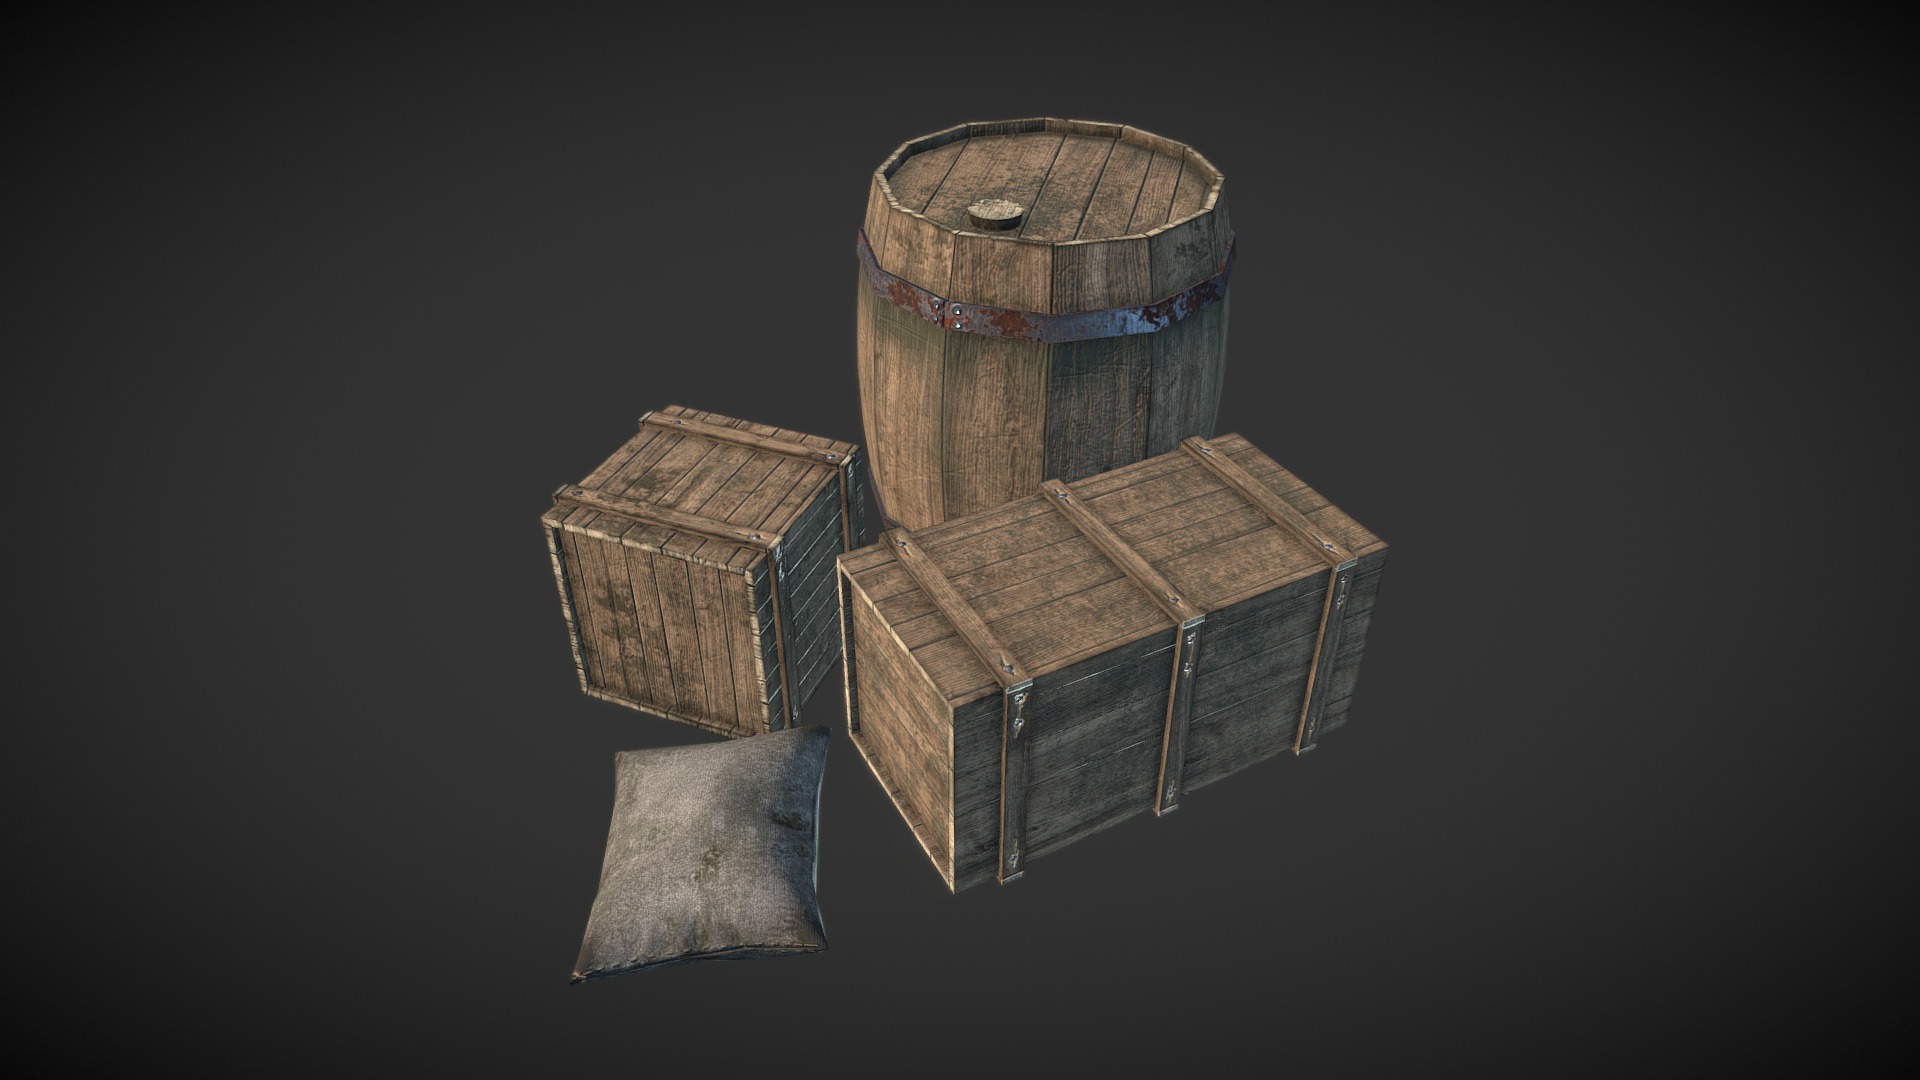 3D model WareHouseThings - This is a 3D model of the WareHouseThings. The 3D model is about a few wooden crates.